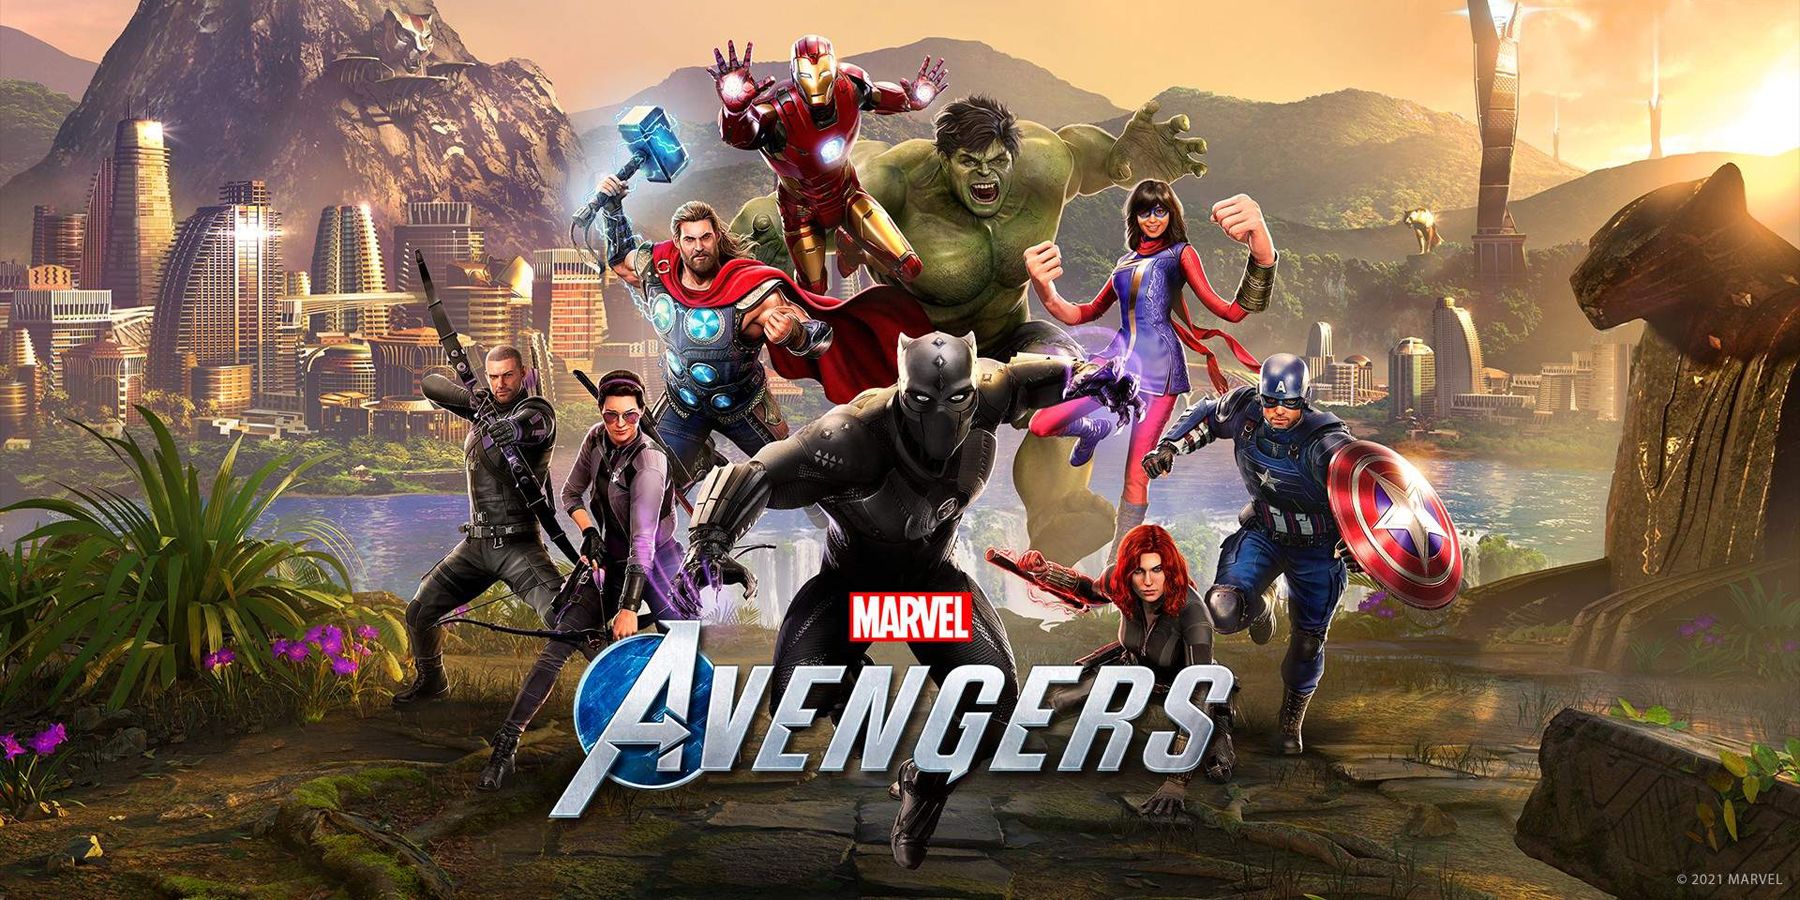 Marvel's Avengers is a hunge hit on Xbox game pass